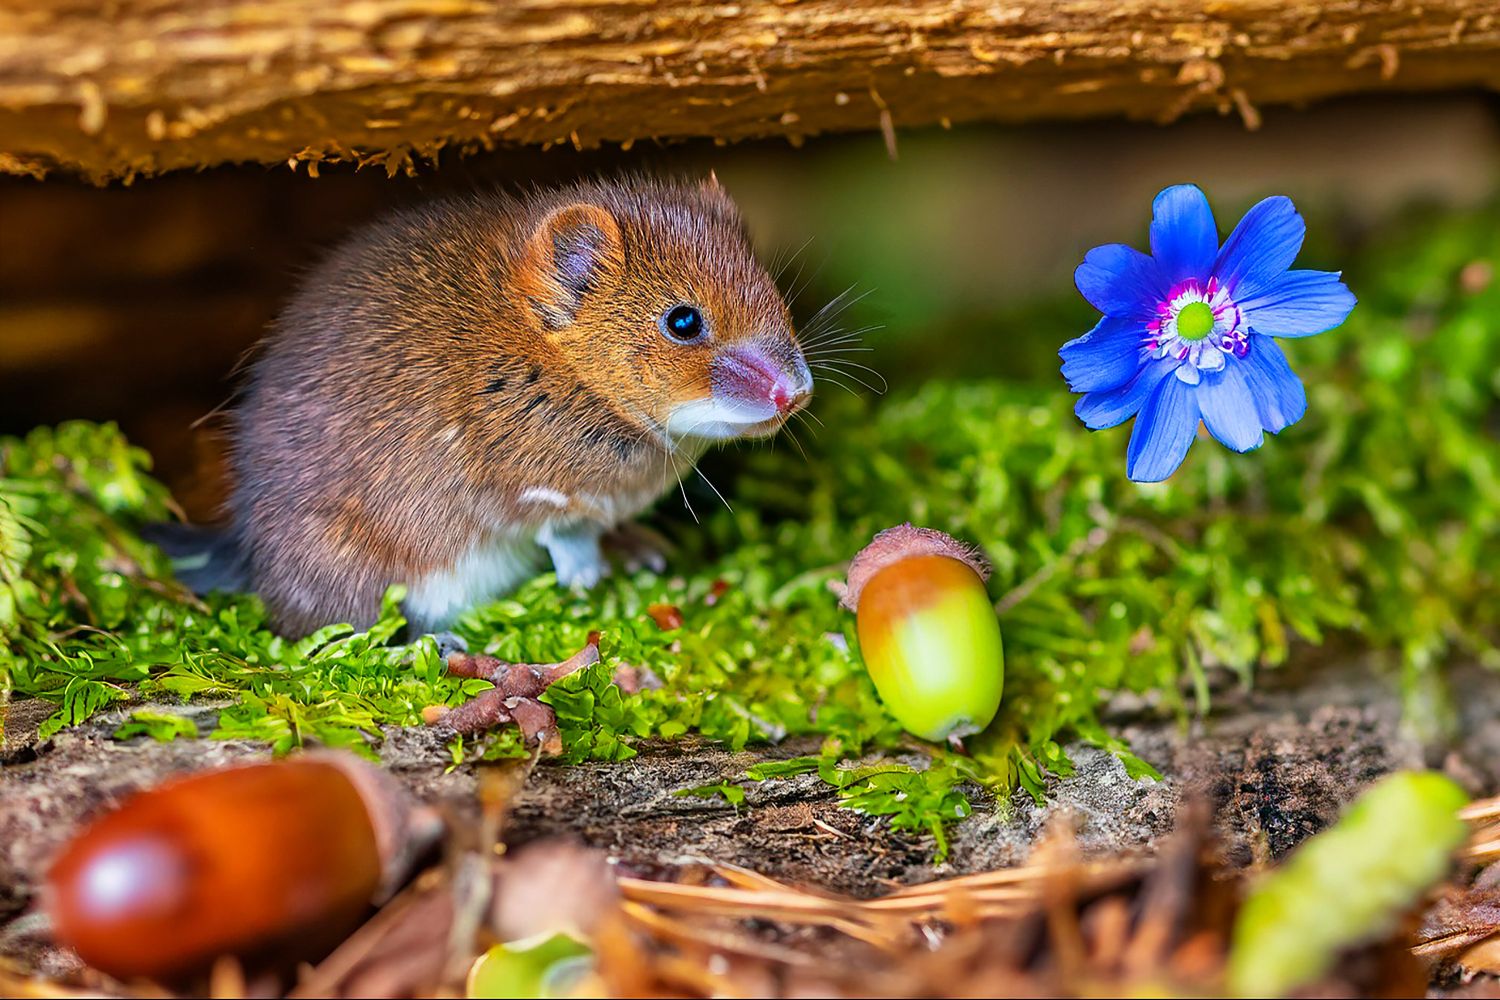 Field Vole storing his food under a tree by Martin Lawrence Photography